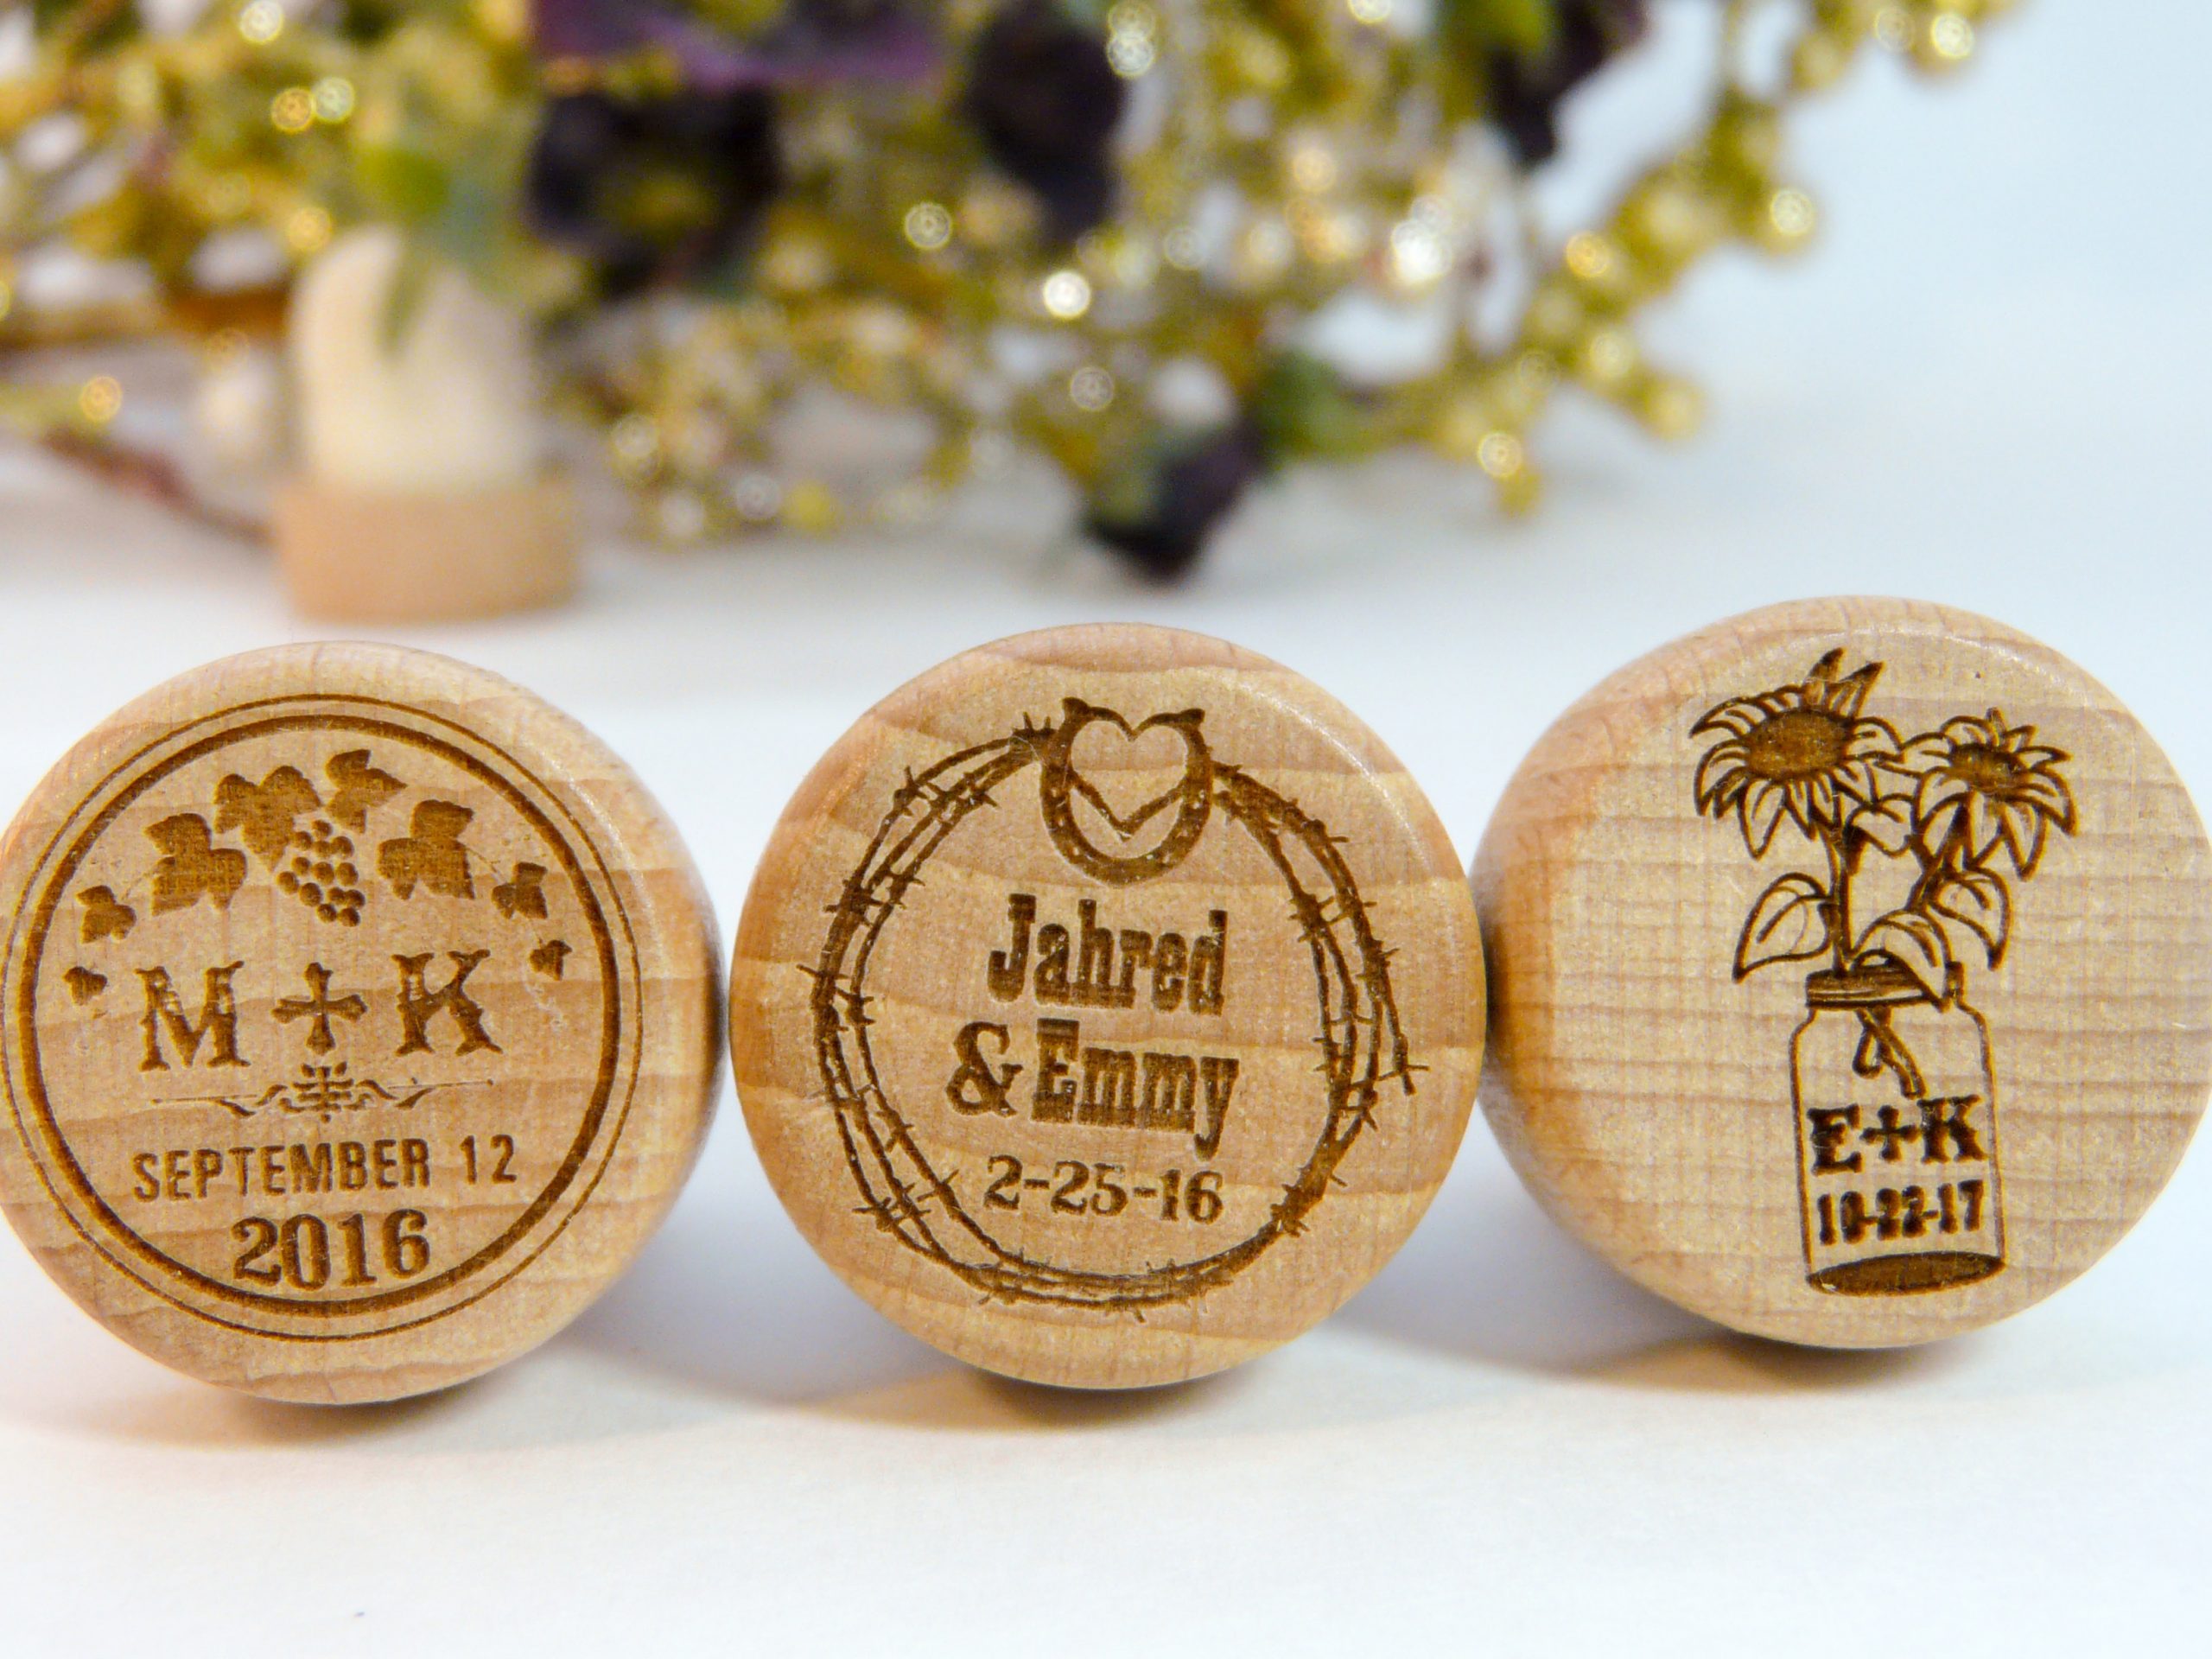 35 WINERY RUSTIC Personalized Wine Stopper Designs